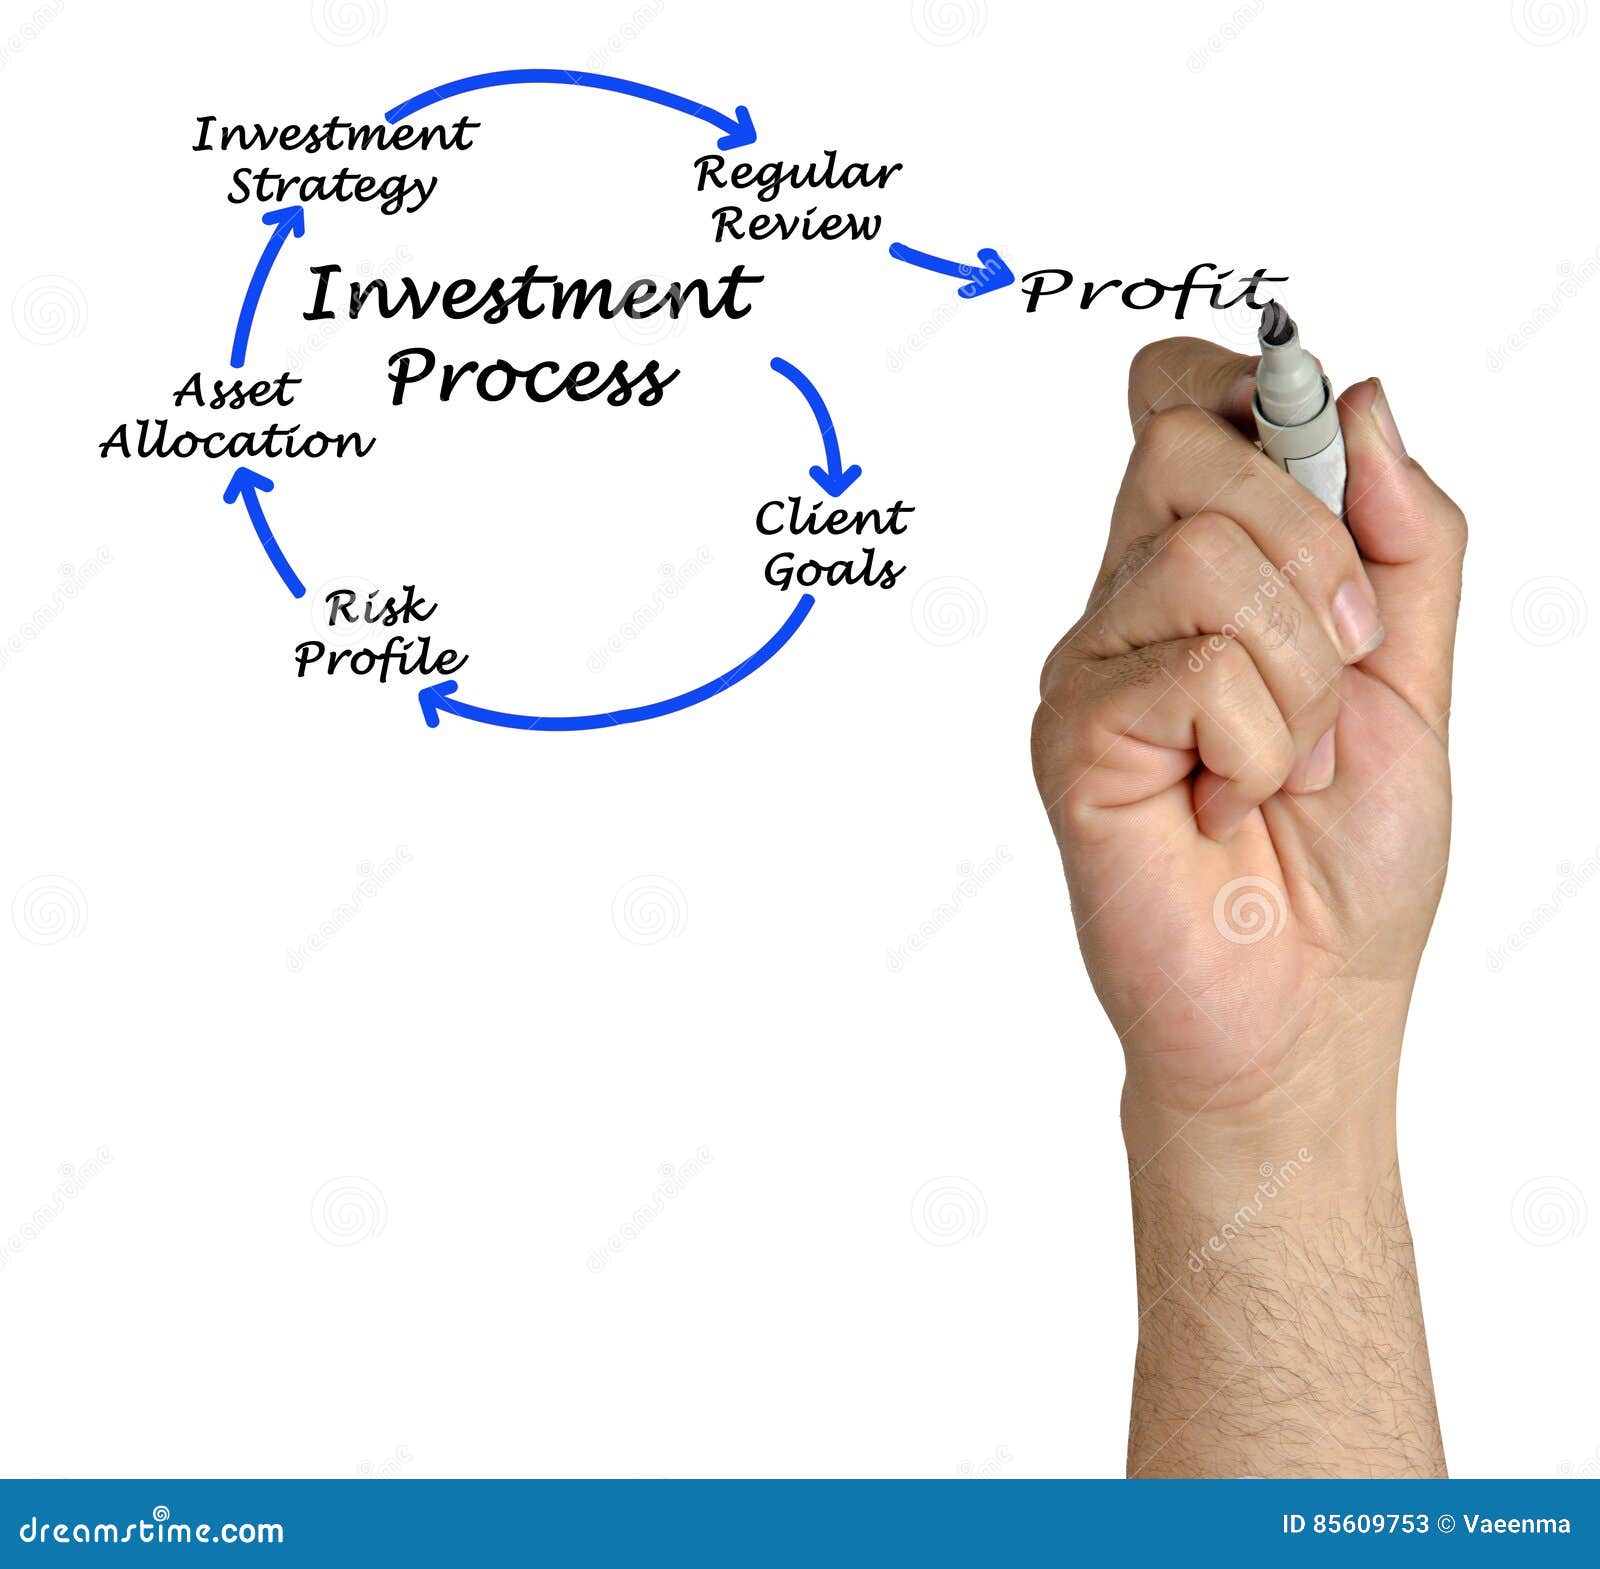 capital investment analysis is best accomplished by techniques that